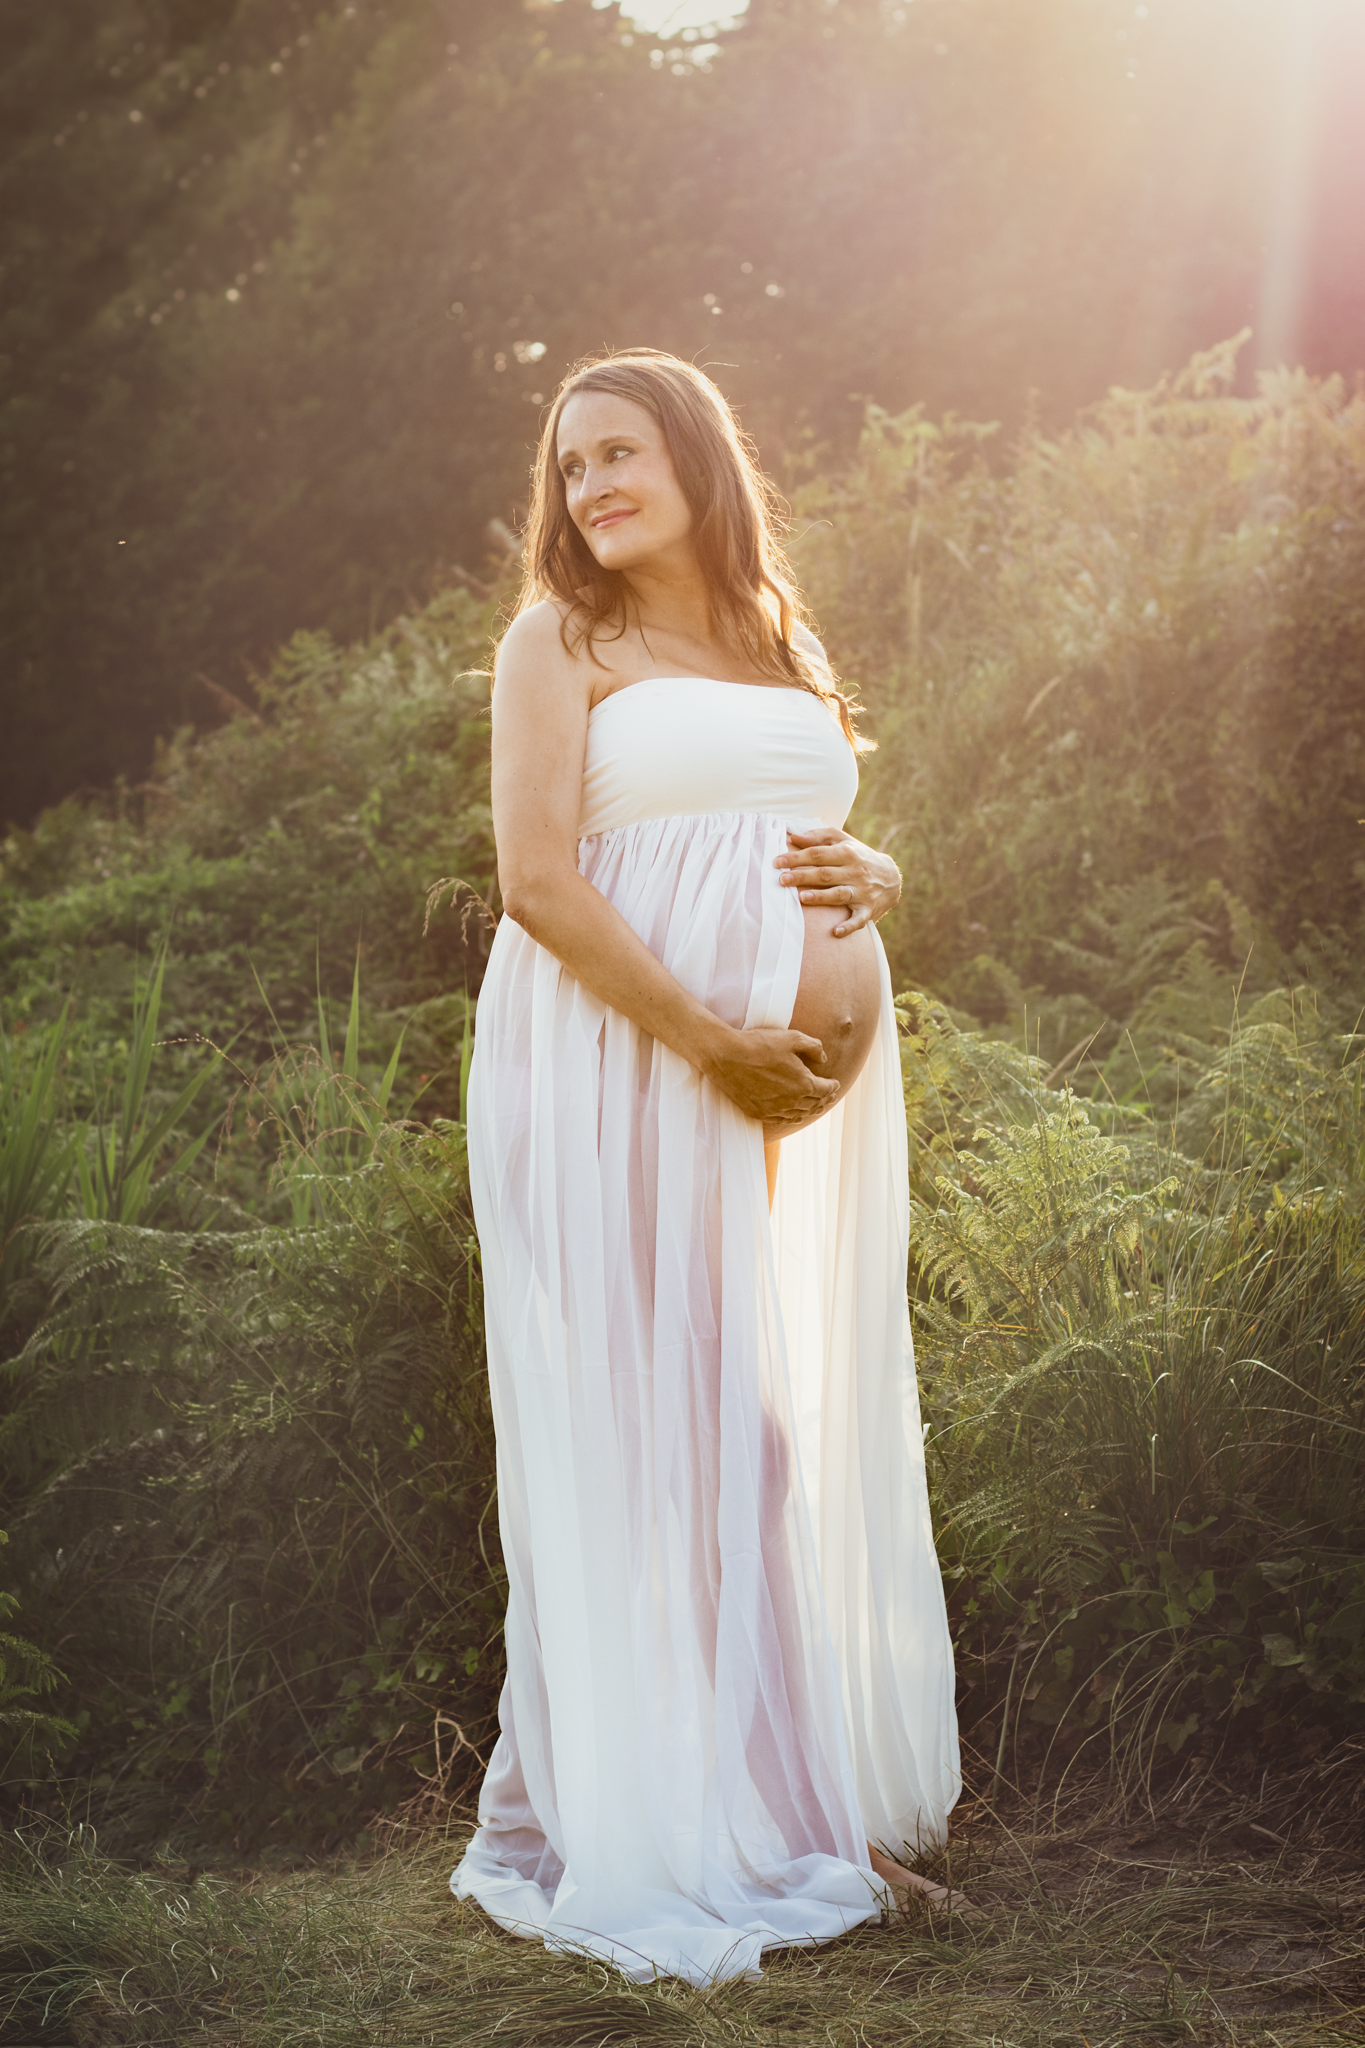 Woman wear white dress poses for Maternity Photoshoot on the beach in Devon